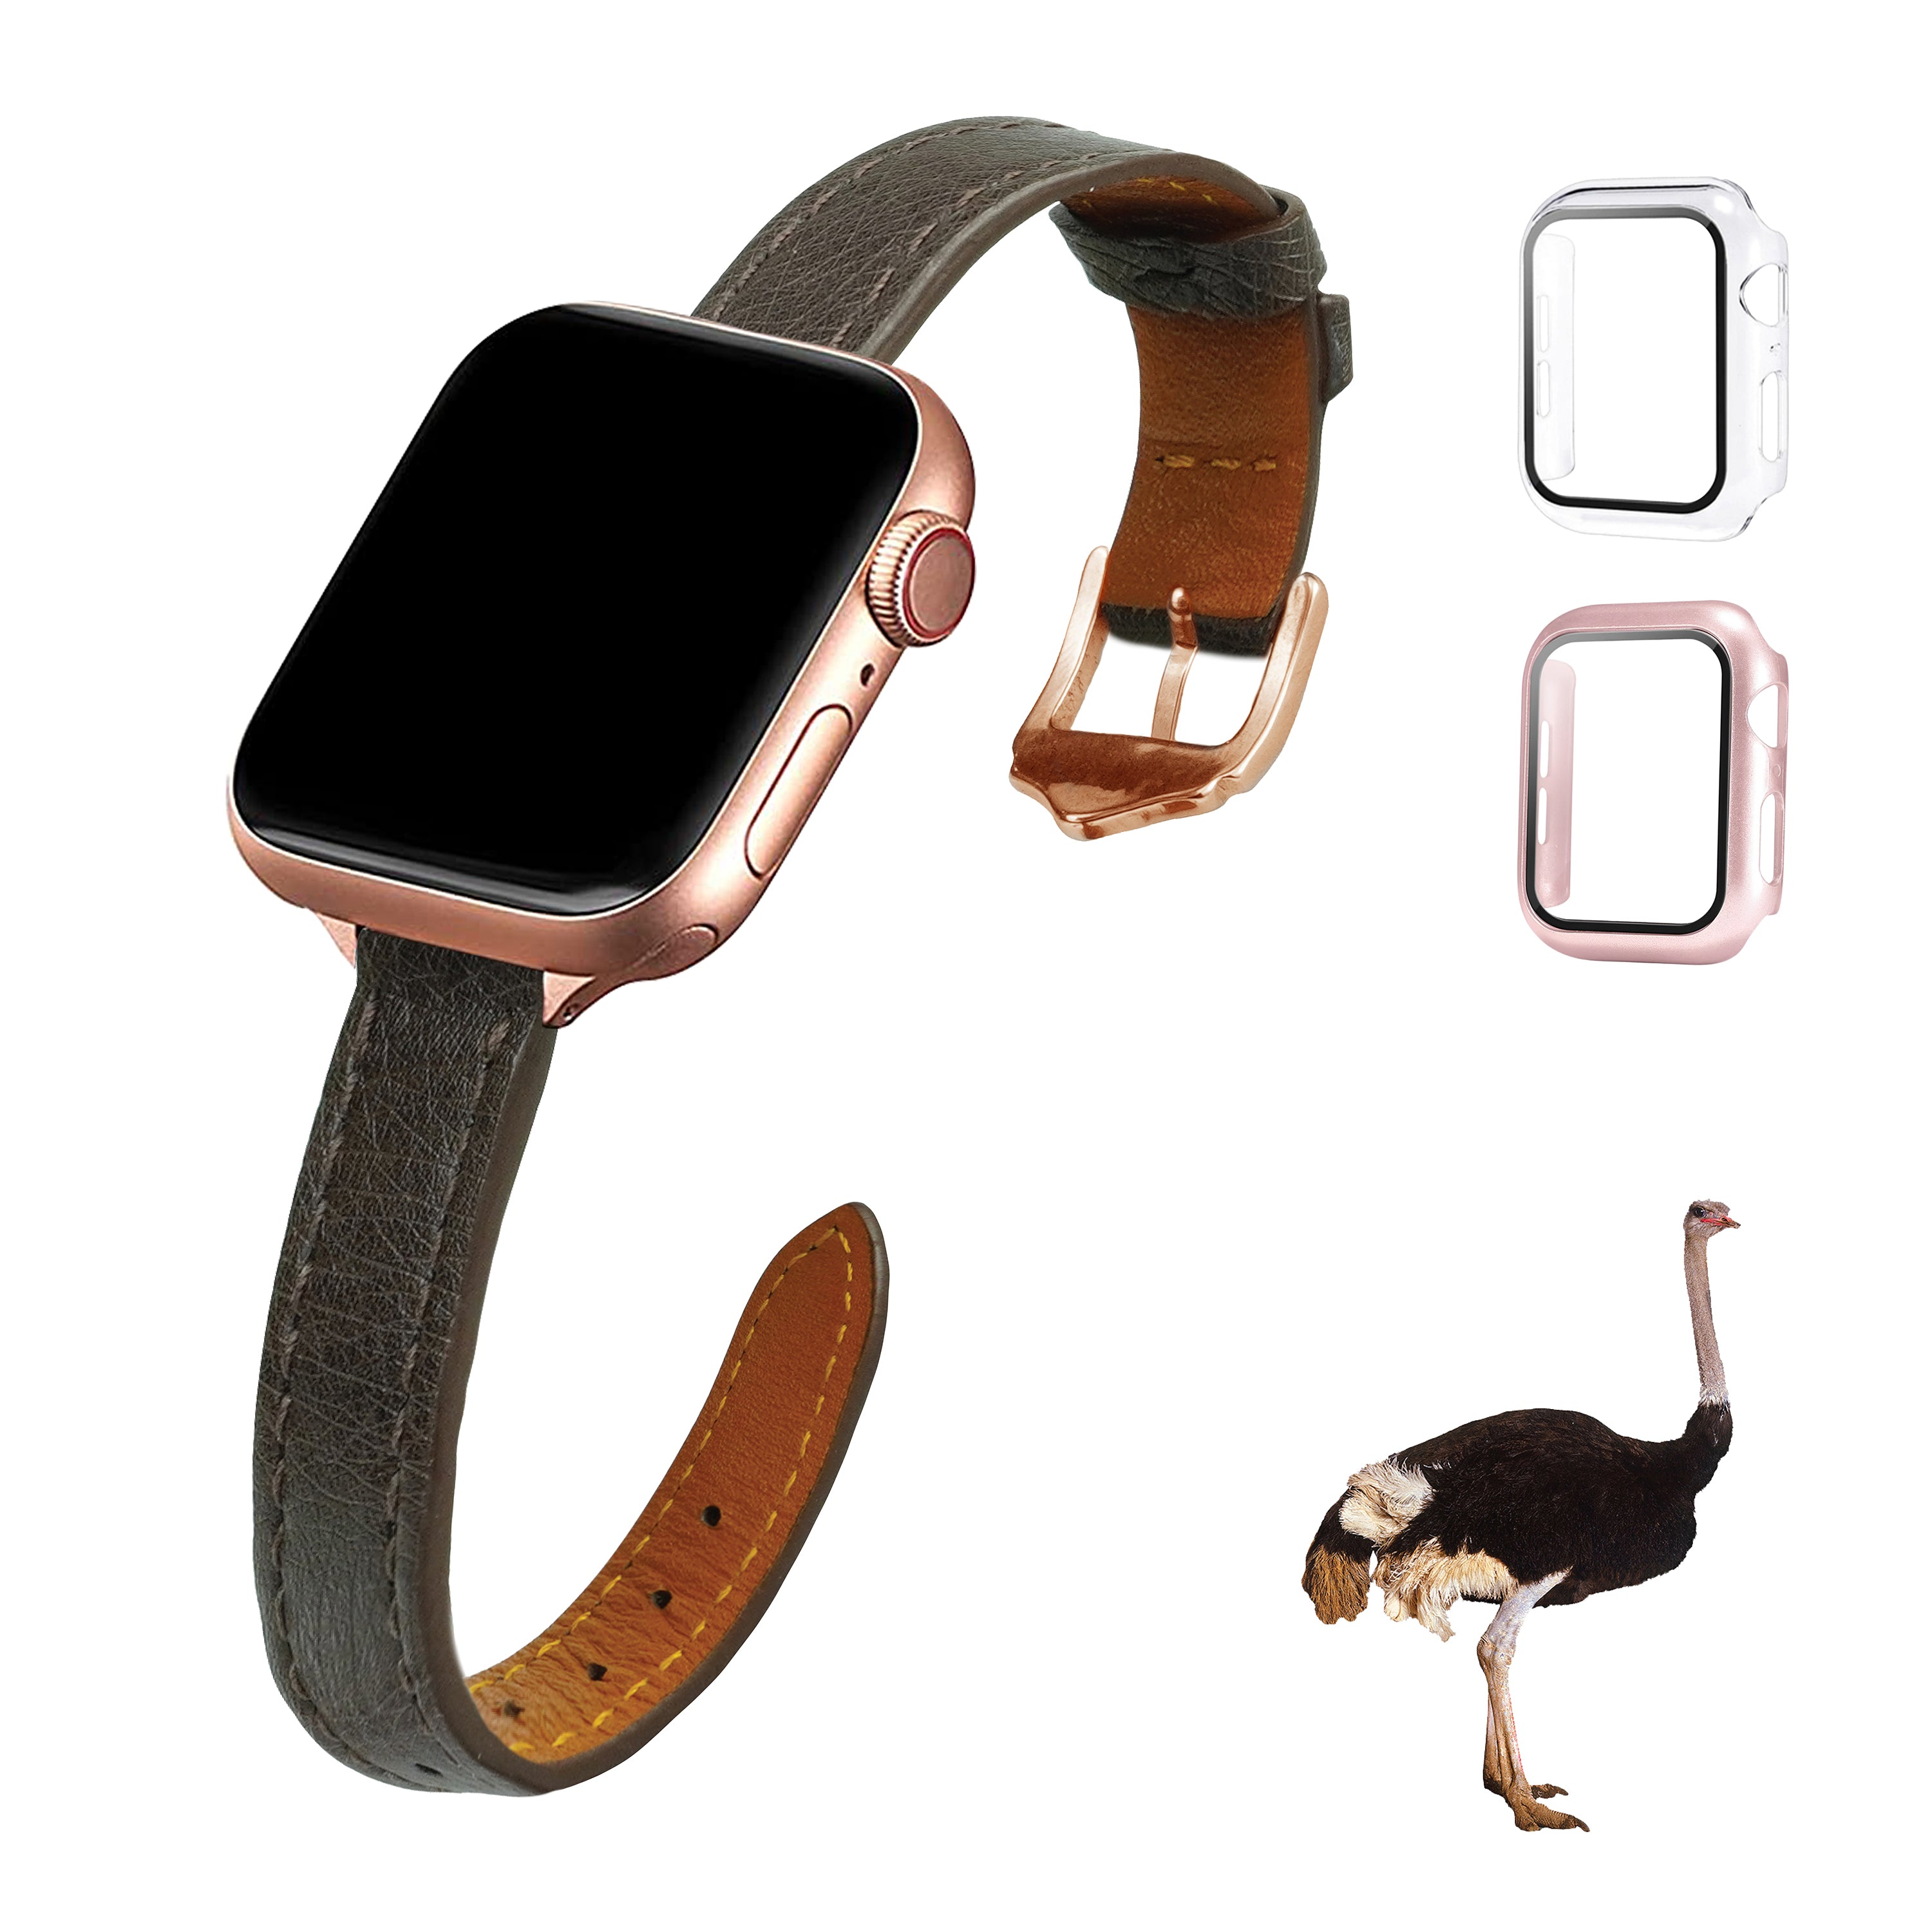 Dark Brown Flat Ostrich Leather Band Compatible Apple Watch Iwatch 42mm Screen Protector Case Gold Adapter Replacement Strap For Smartwatch Series 1 2 3 Leather Handmade AW-183G-W-42MM